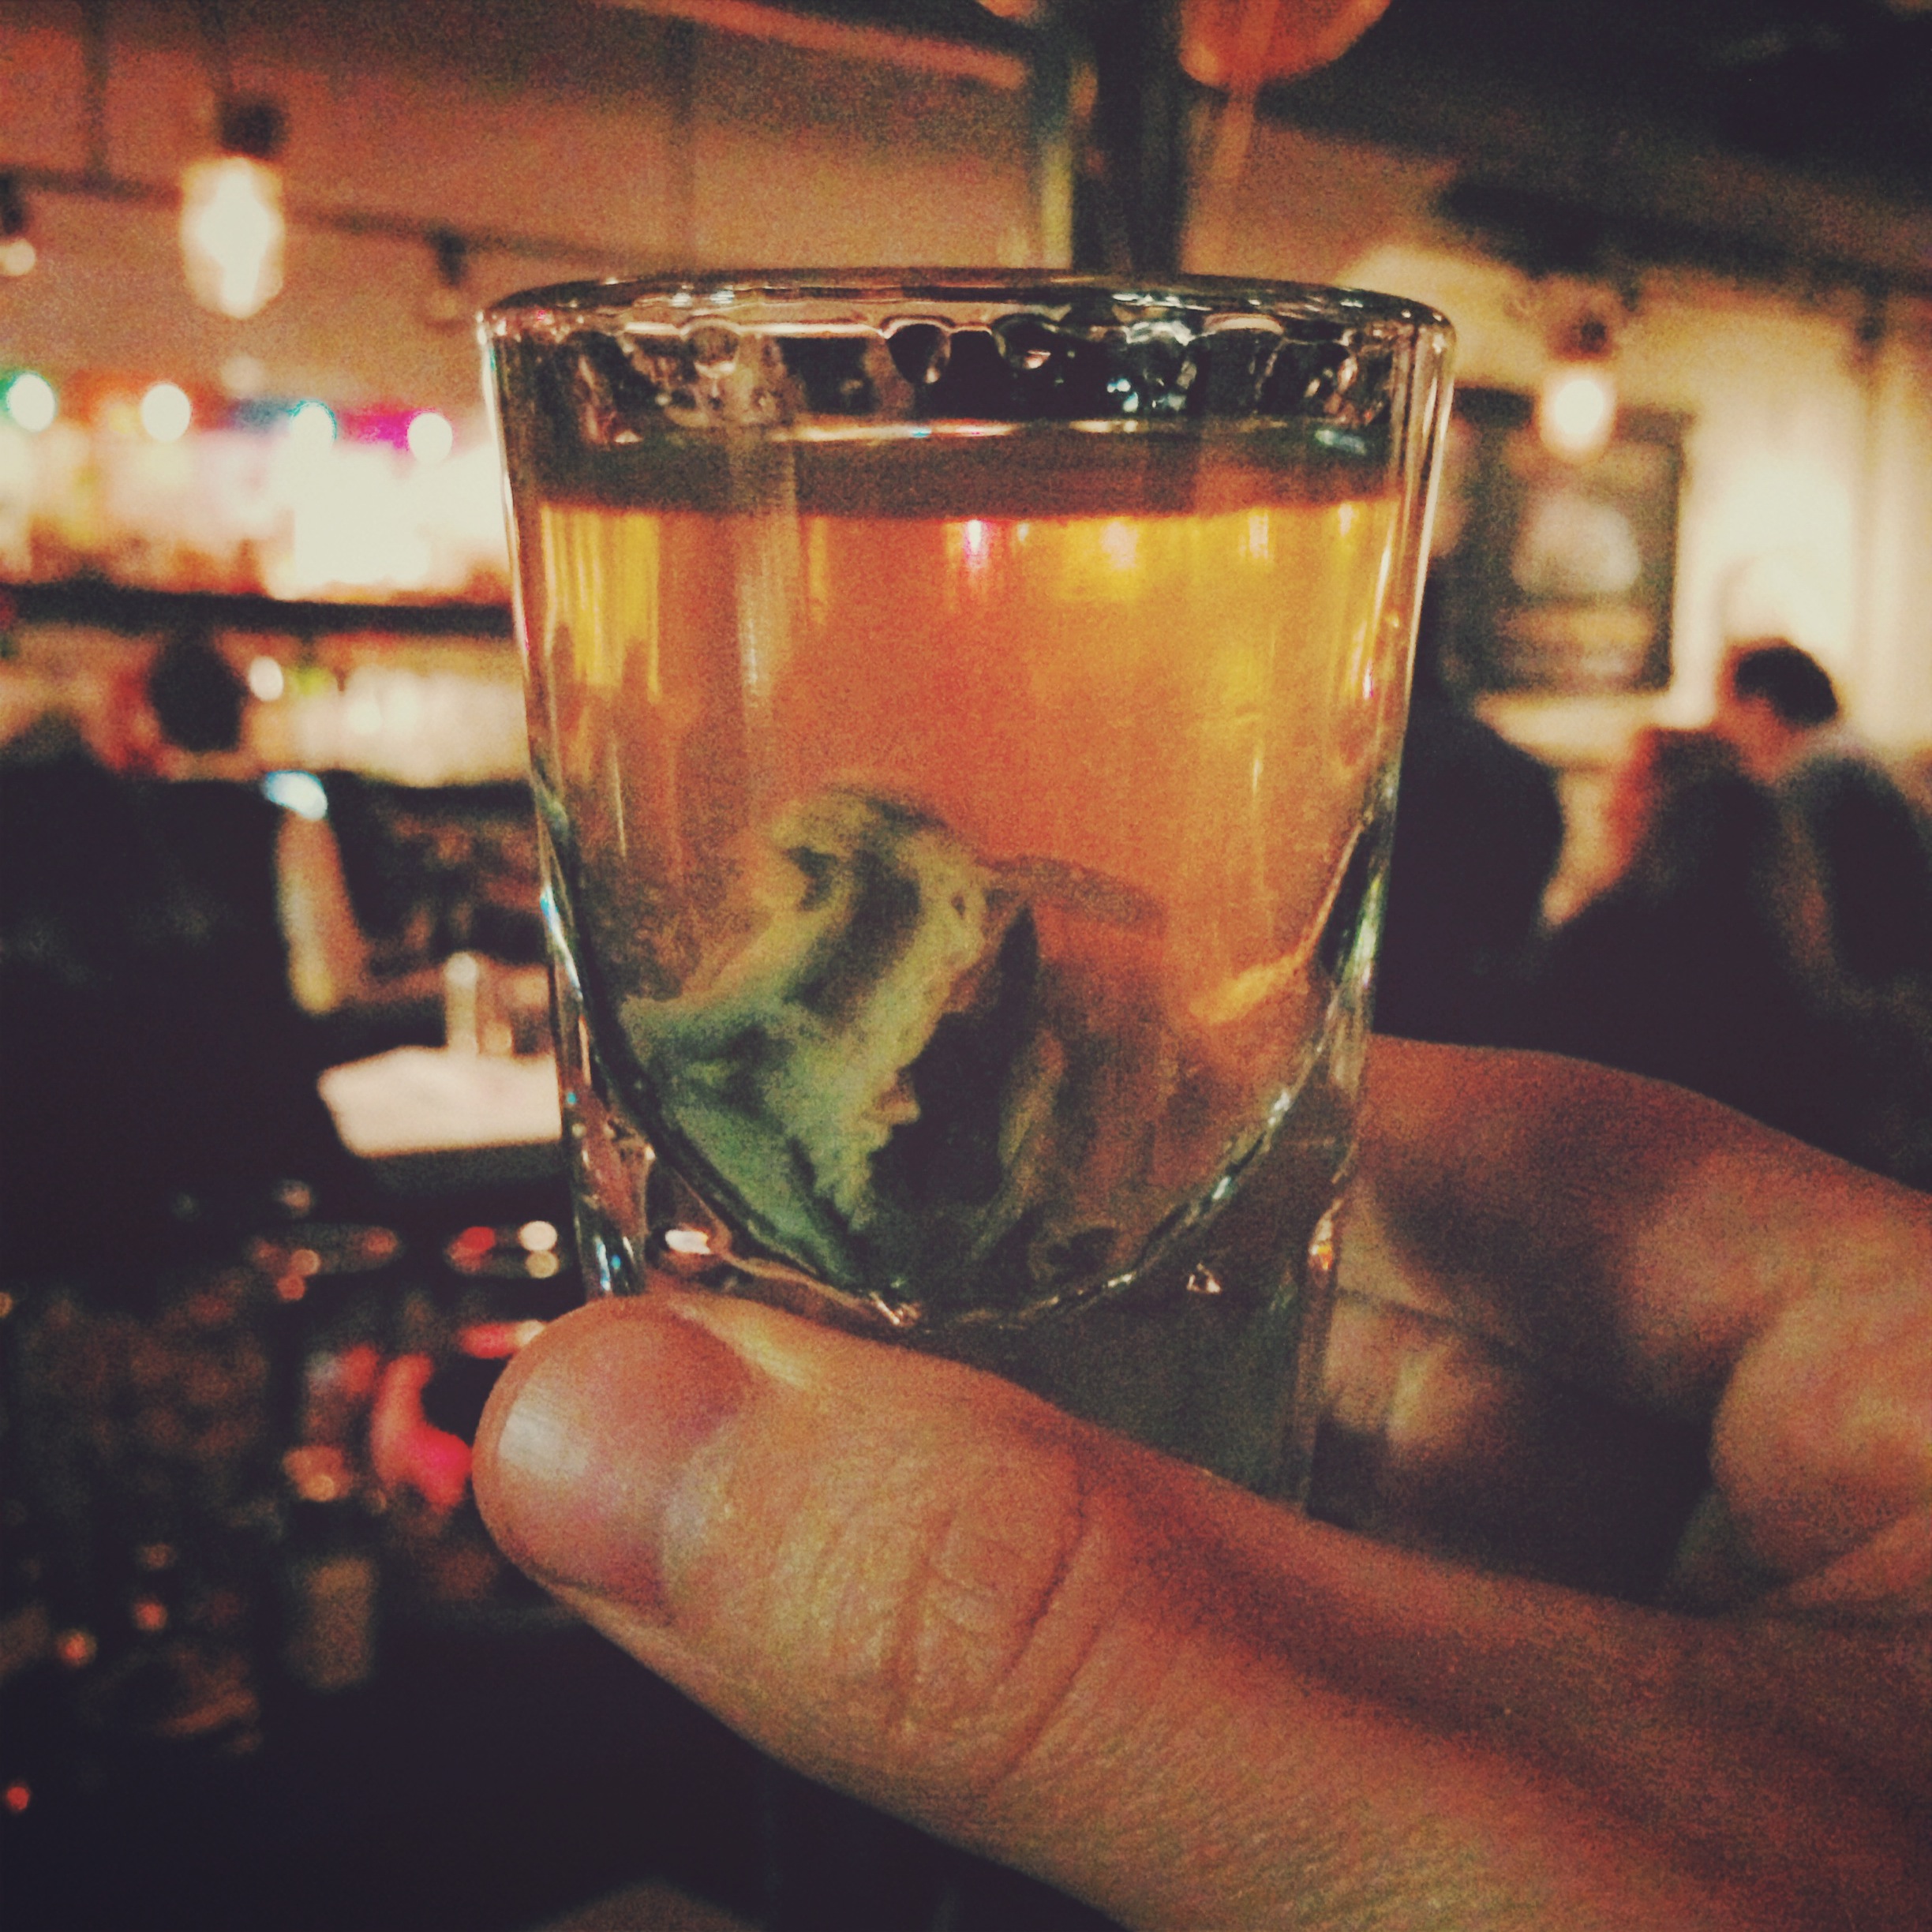 We closed the year out with a bang in Philadelphia, including gulping down oysters in gin...